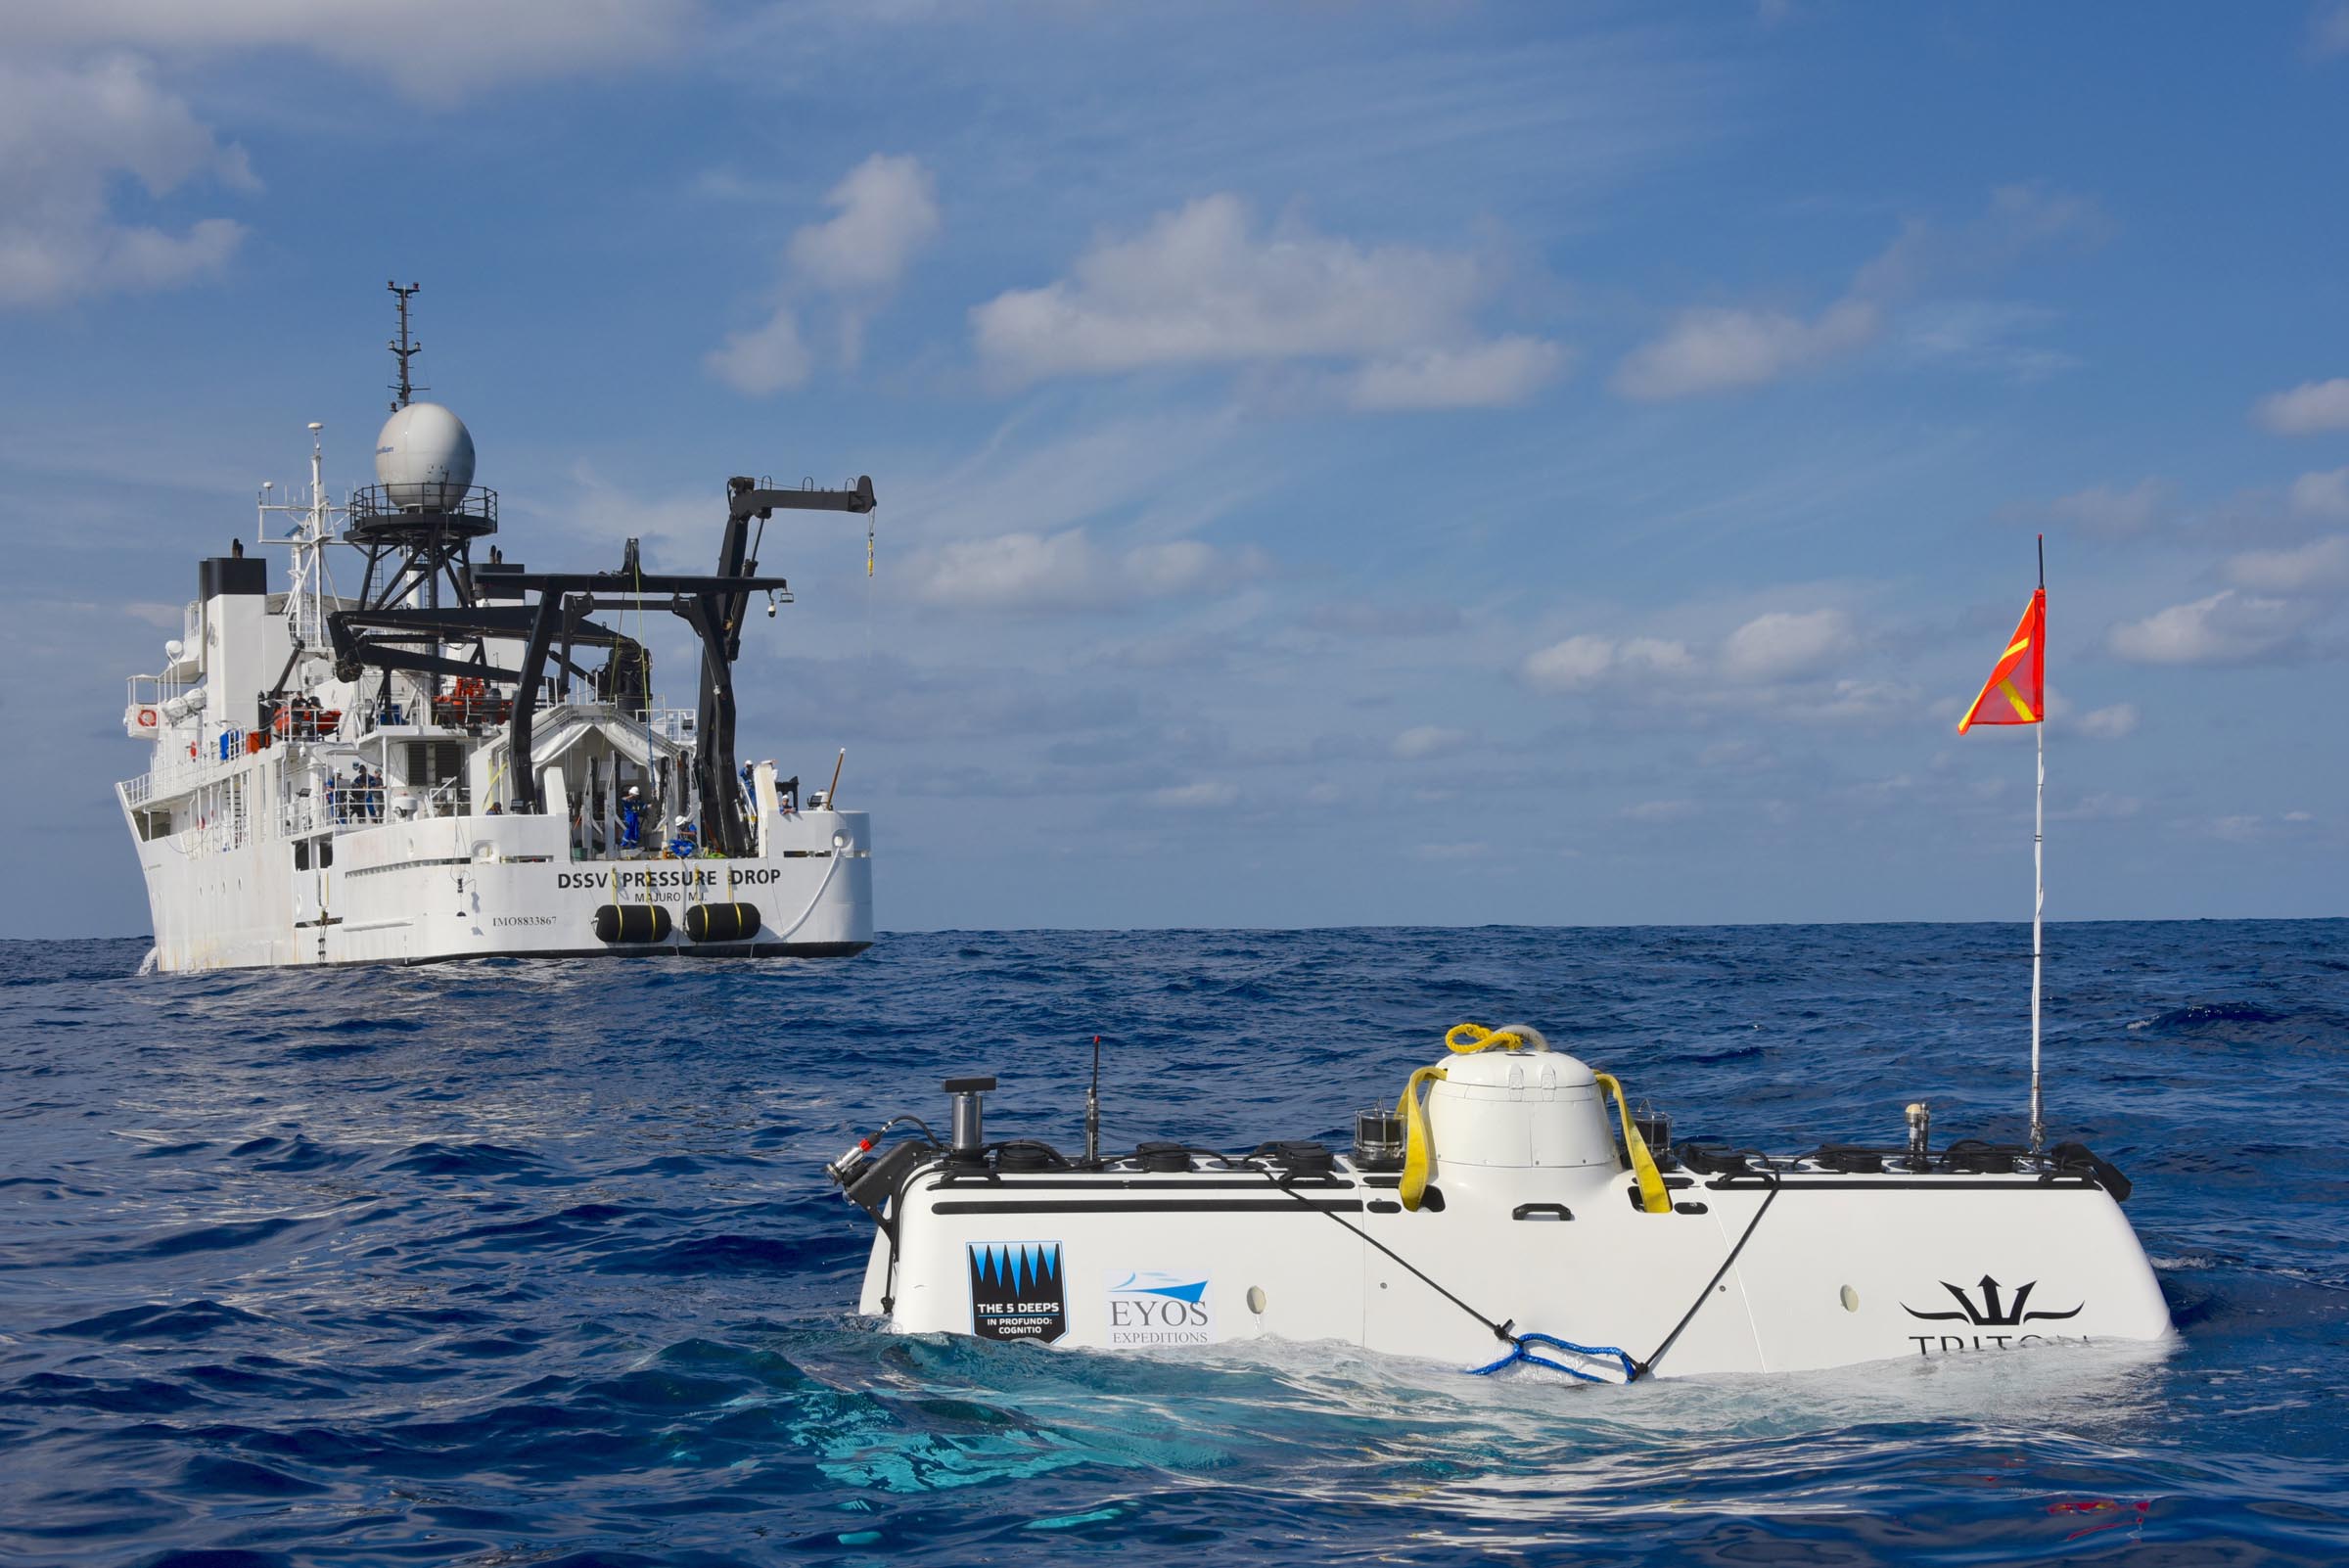 The DSV Limiting Factor on the surface following record-breaking dive to the deepest point in the Indian Ocean